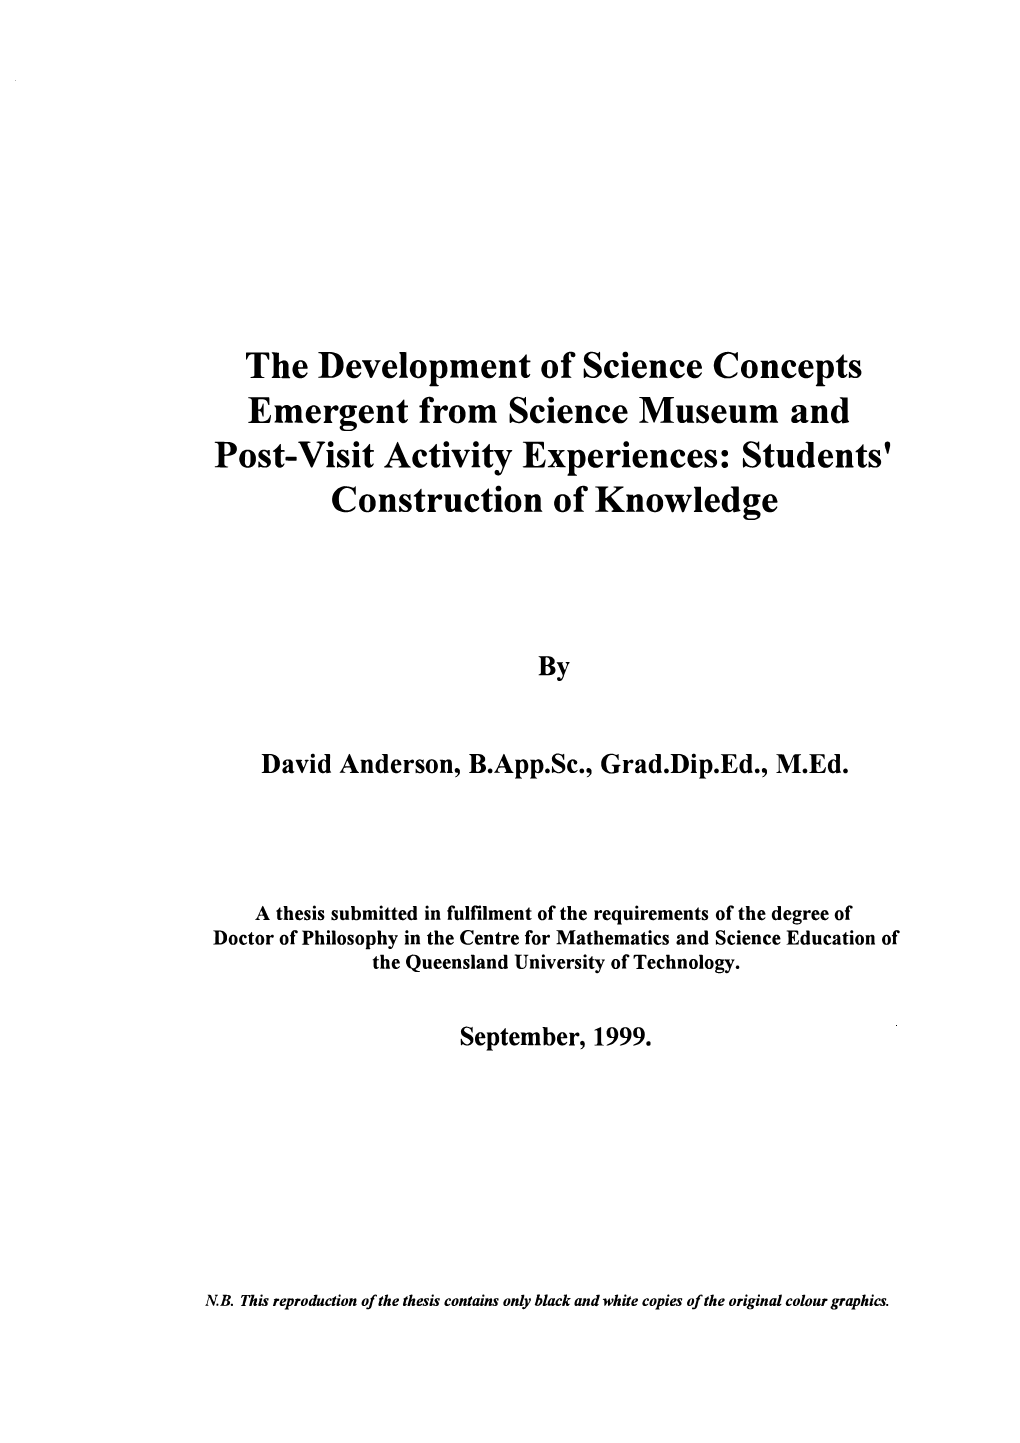 The Development of Science Concepts Emergent from Science Museum and Post-Visit Activity Experiences: Students' Construction of Knowledge